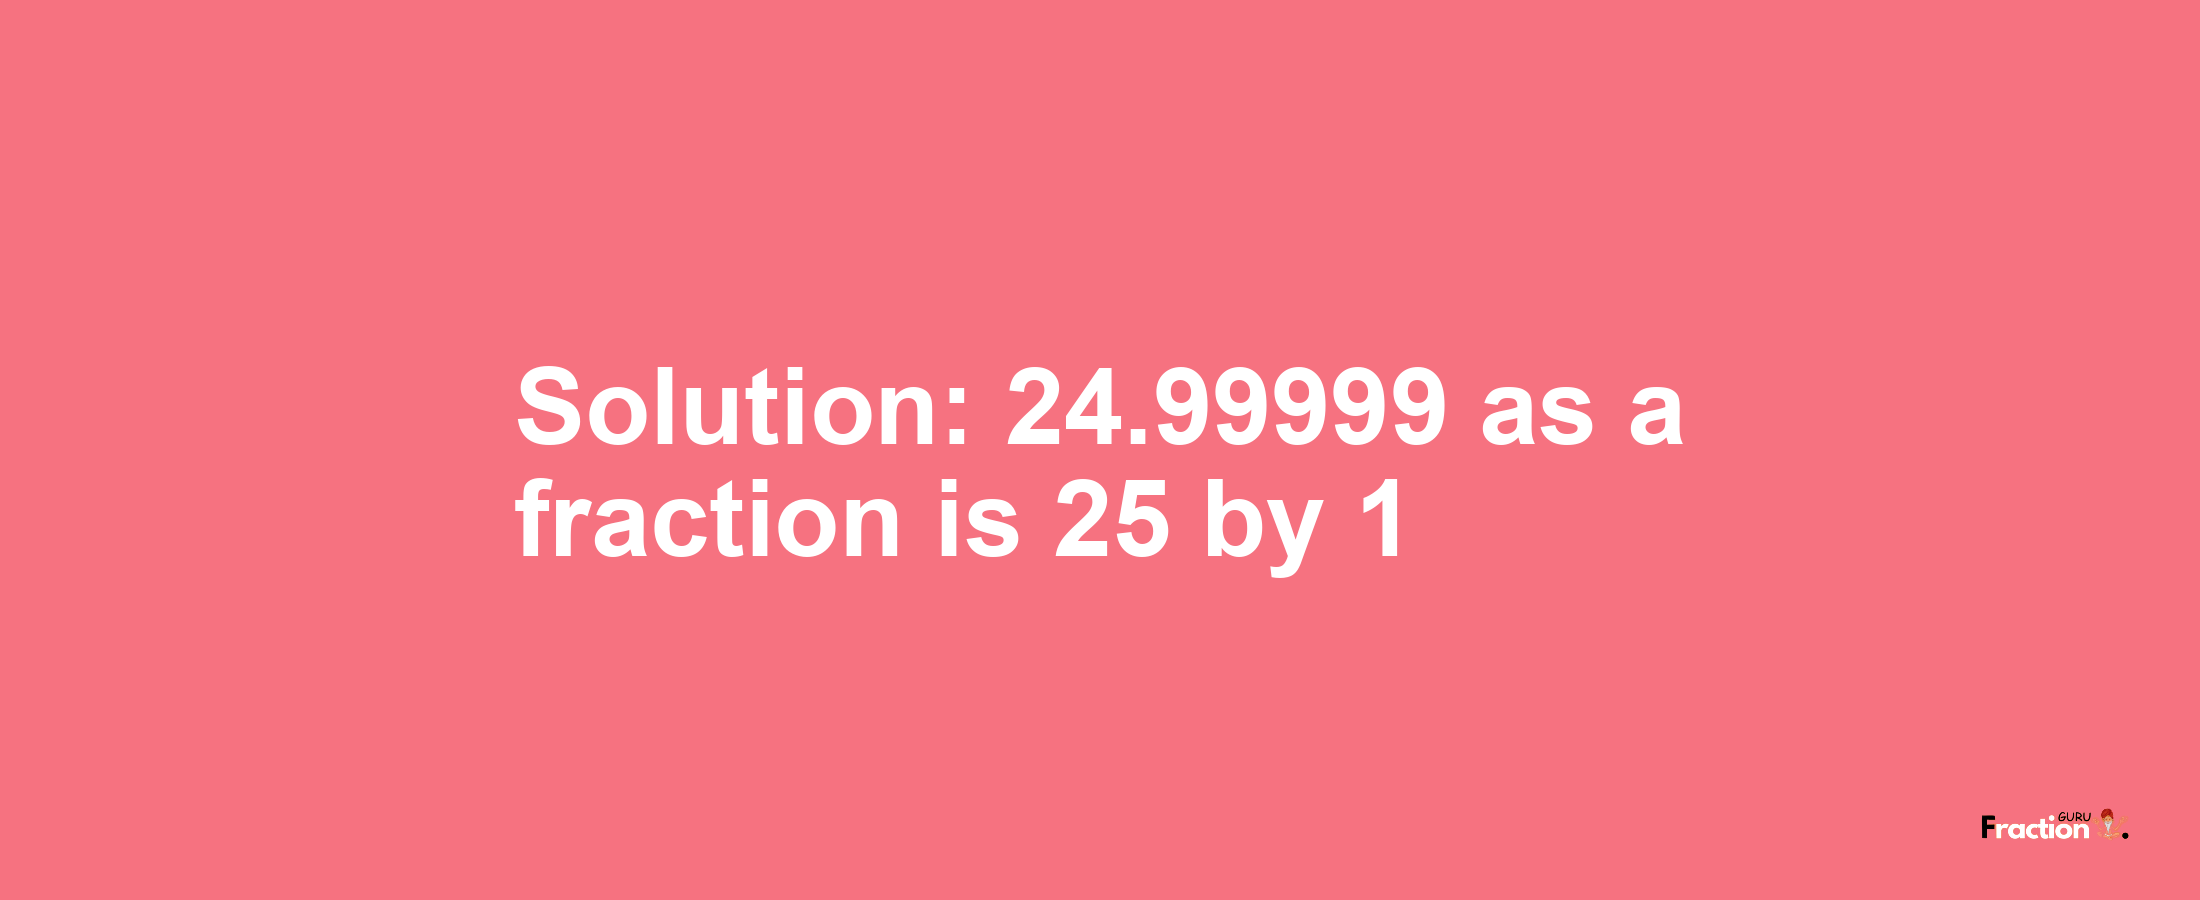 Solution:24.99999 as a fraction is 25/1